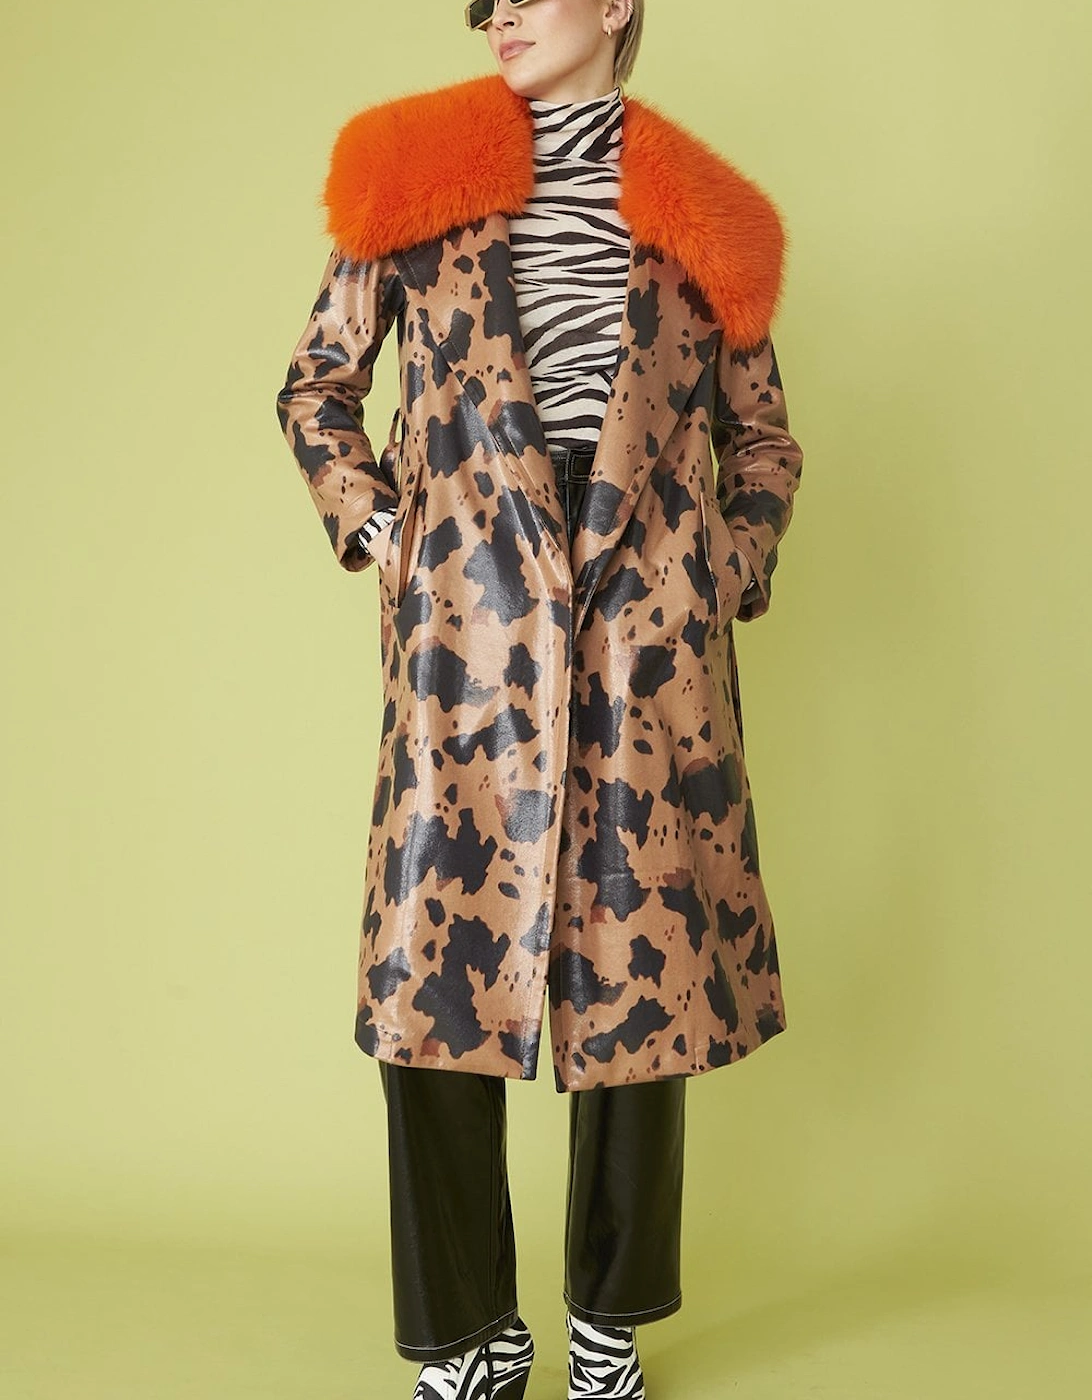 Cow Print Eco Leather Trench Coat with Orange Faux Fur Collar